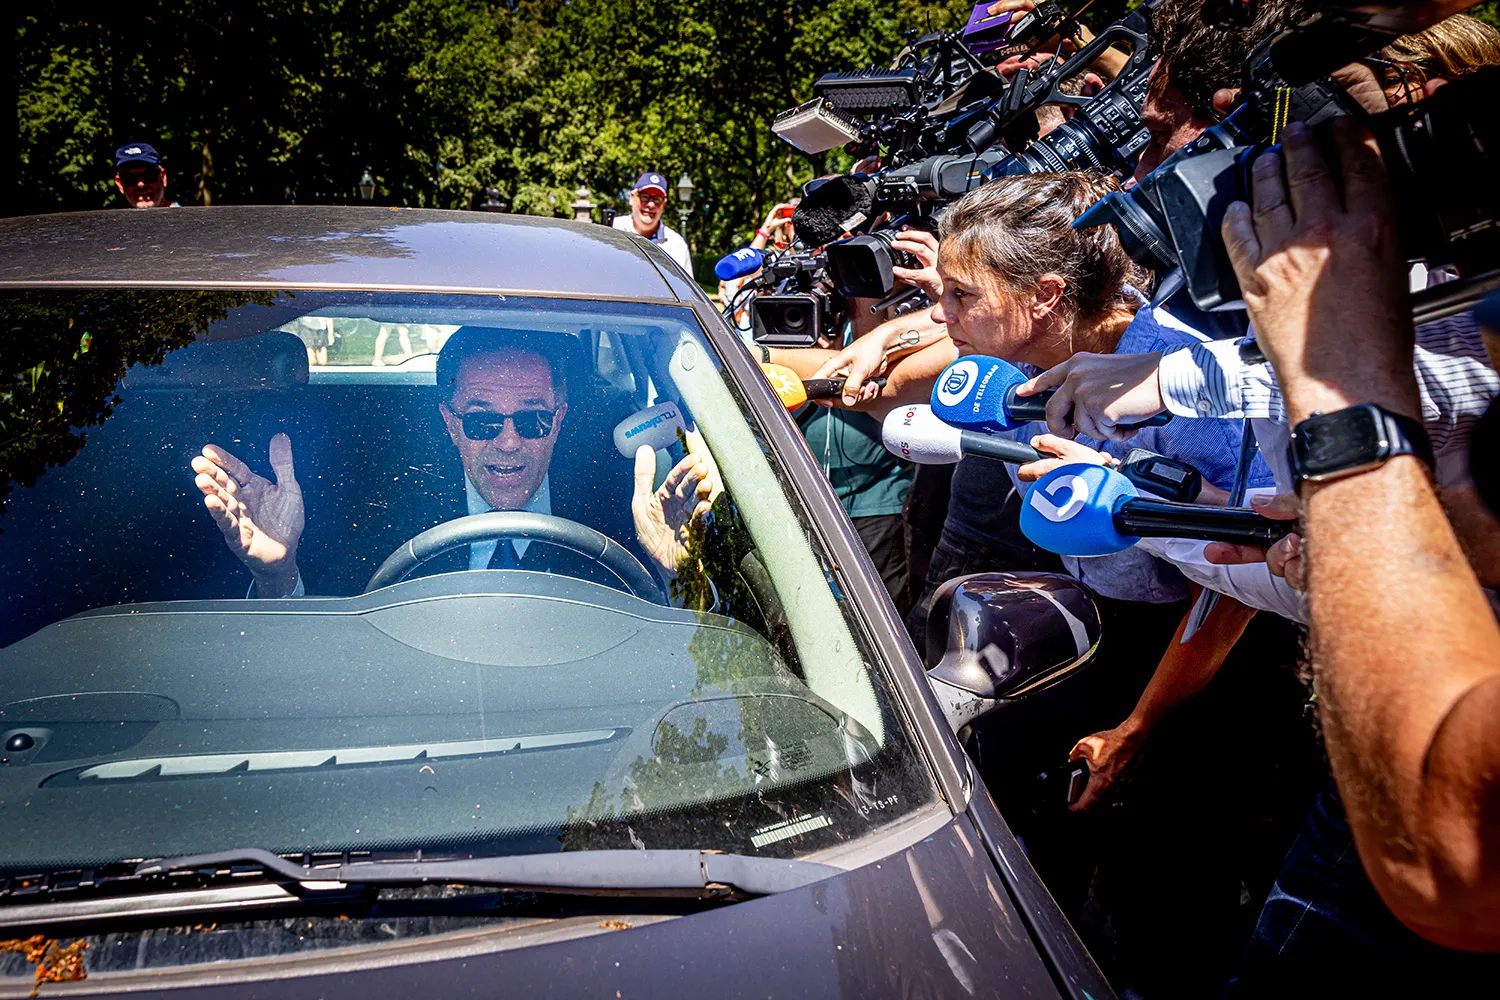 Mark Rutte gestures with both hands, his mouth open, as he sits behind the wheel of a car as reporters with microphones and video cameras swarm the vehicle, some of them sticking microphones through the open drivers' side window. Rutte wears a dark suit and tie with sunglasses.